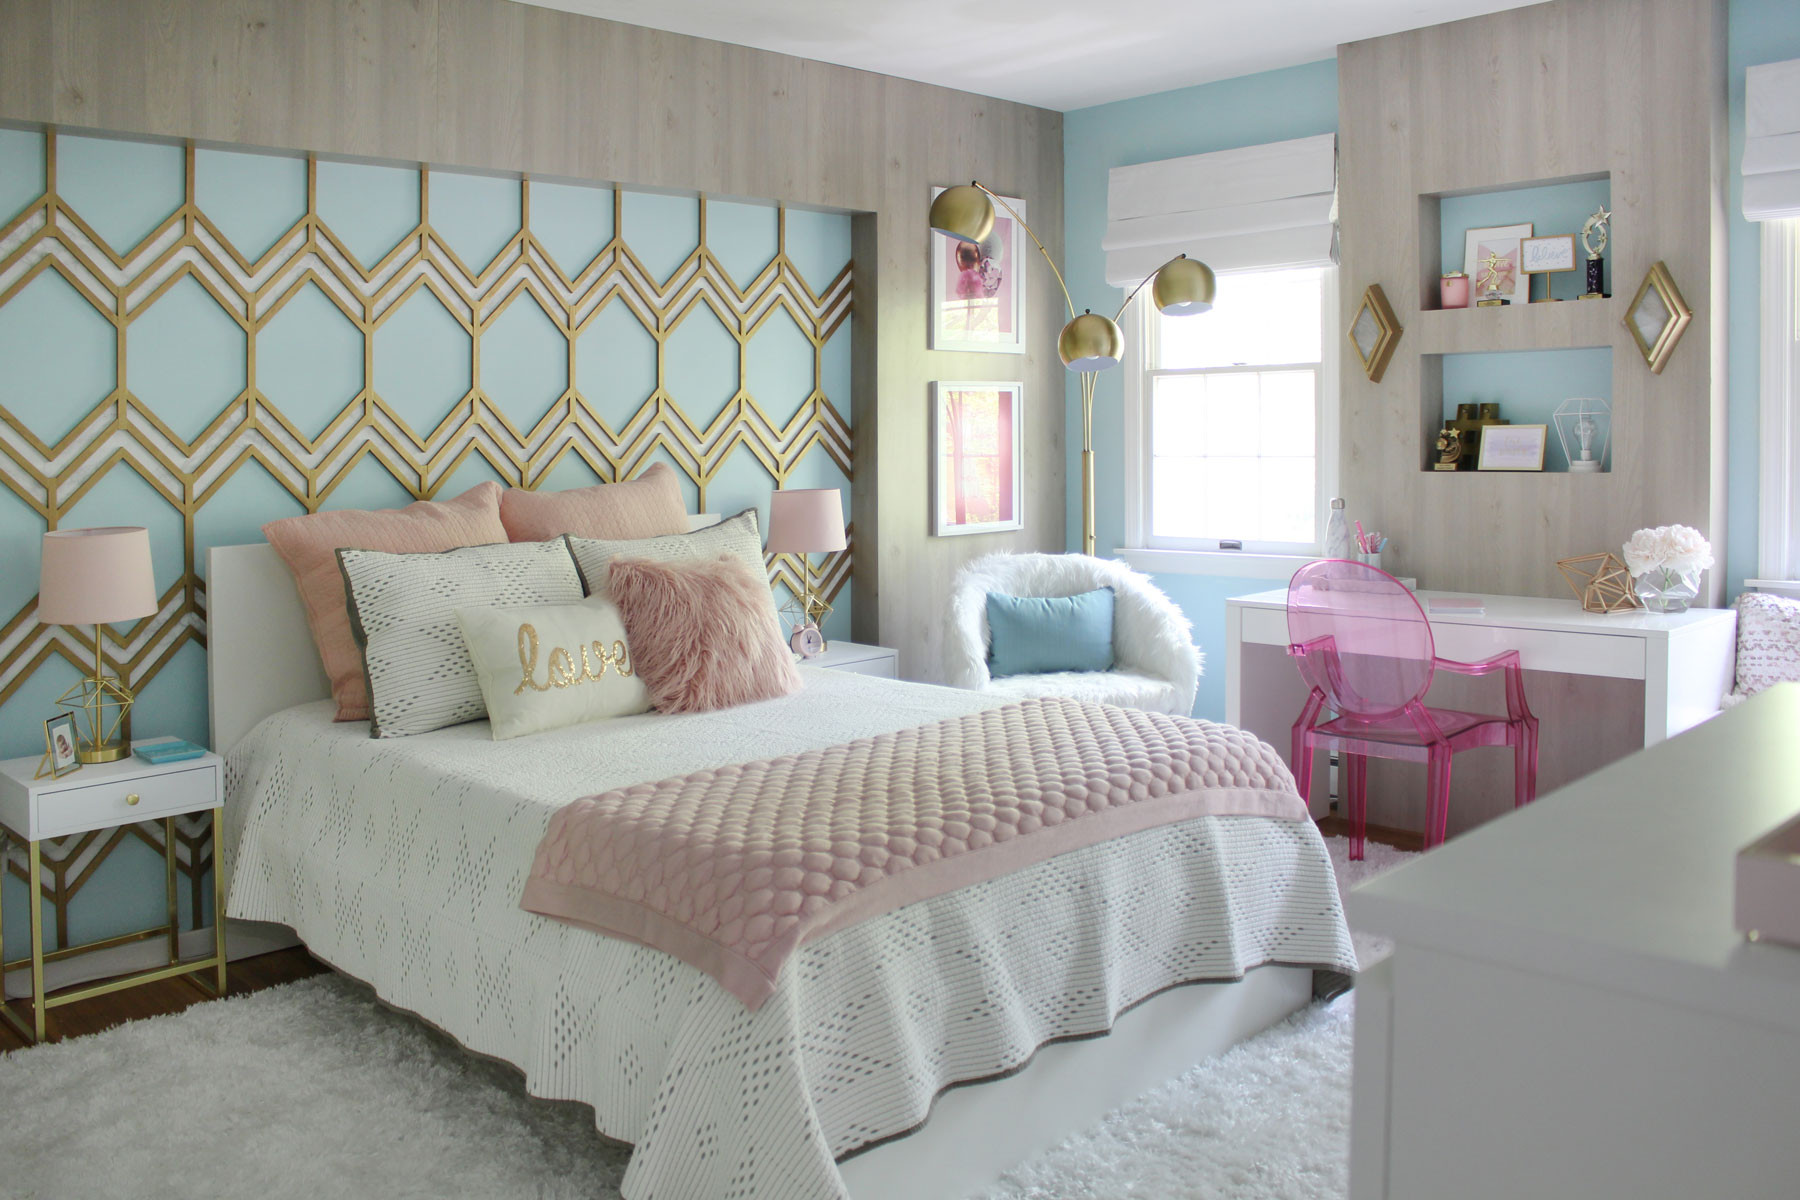 Dream Kids Room
 This New Design Show Will Inspire Your Kids to Dream Big